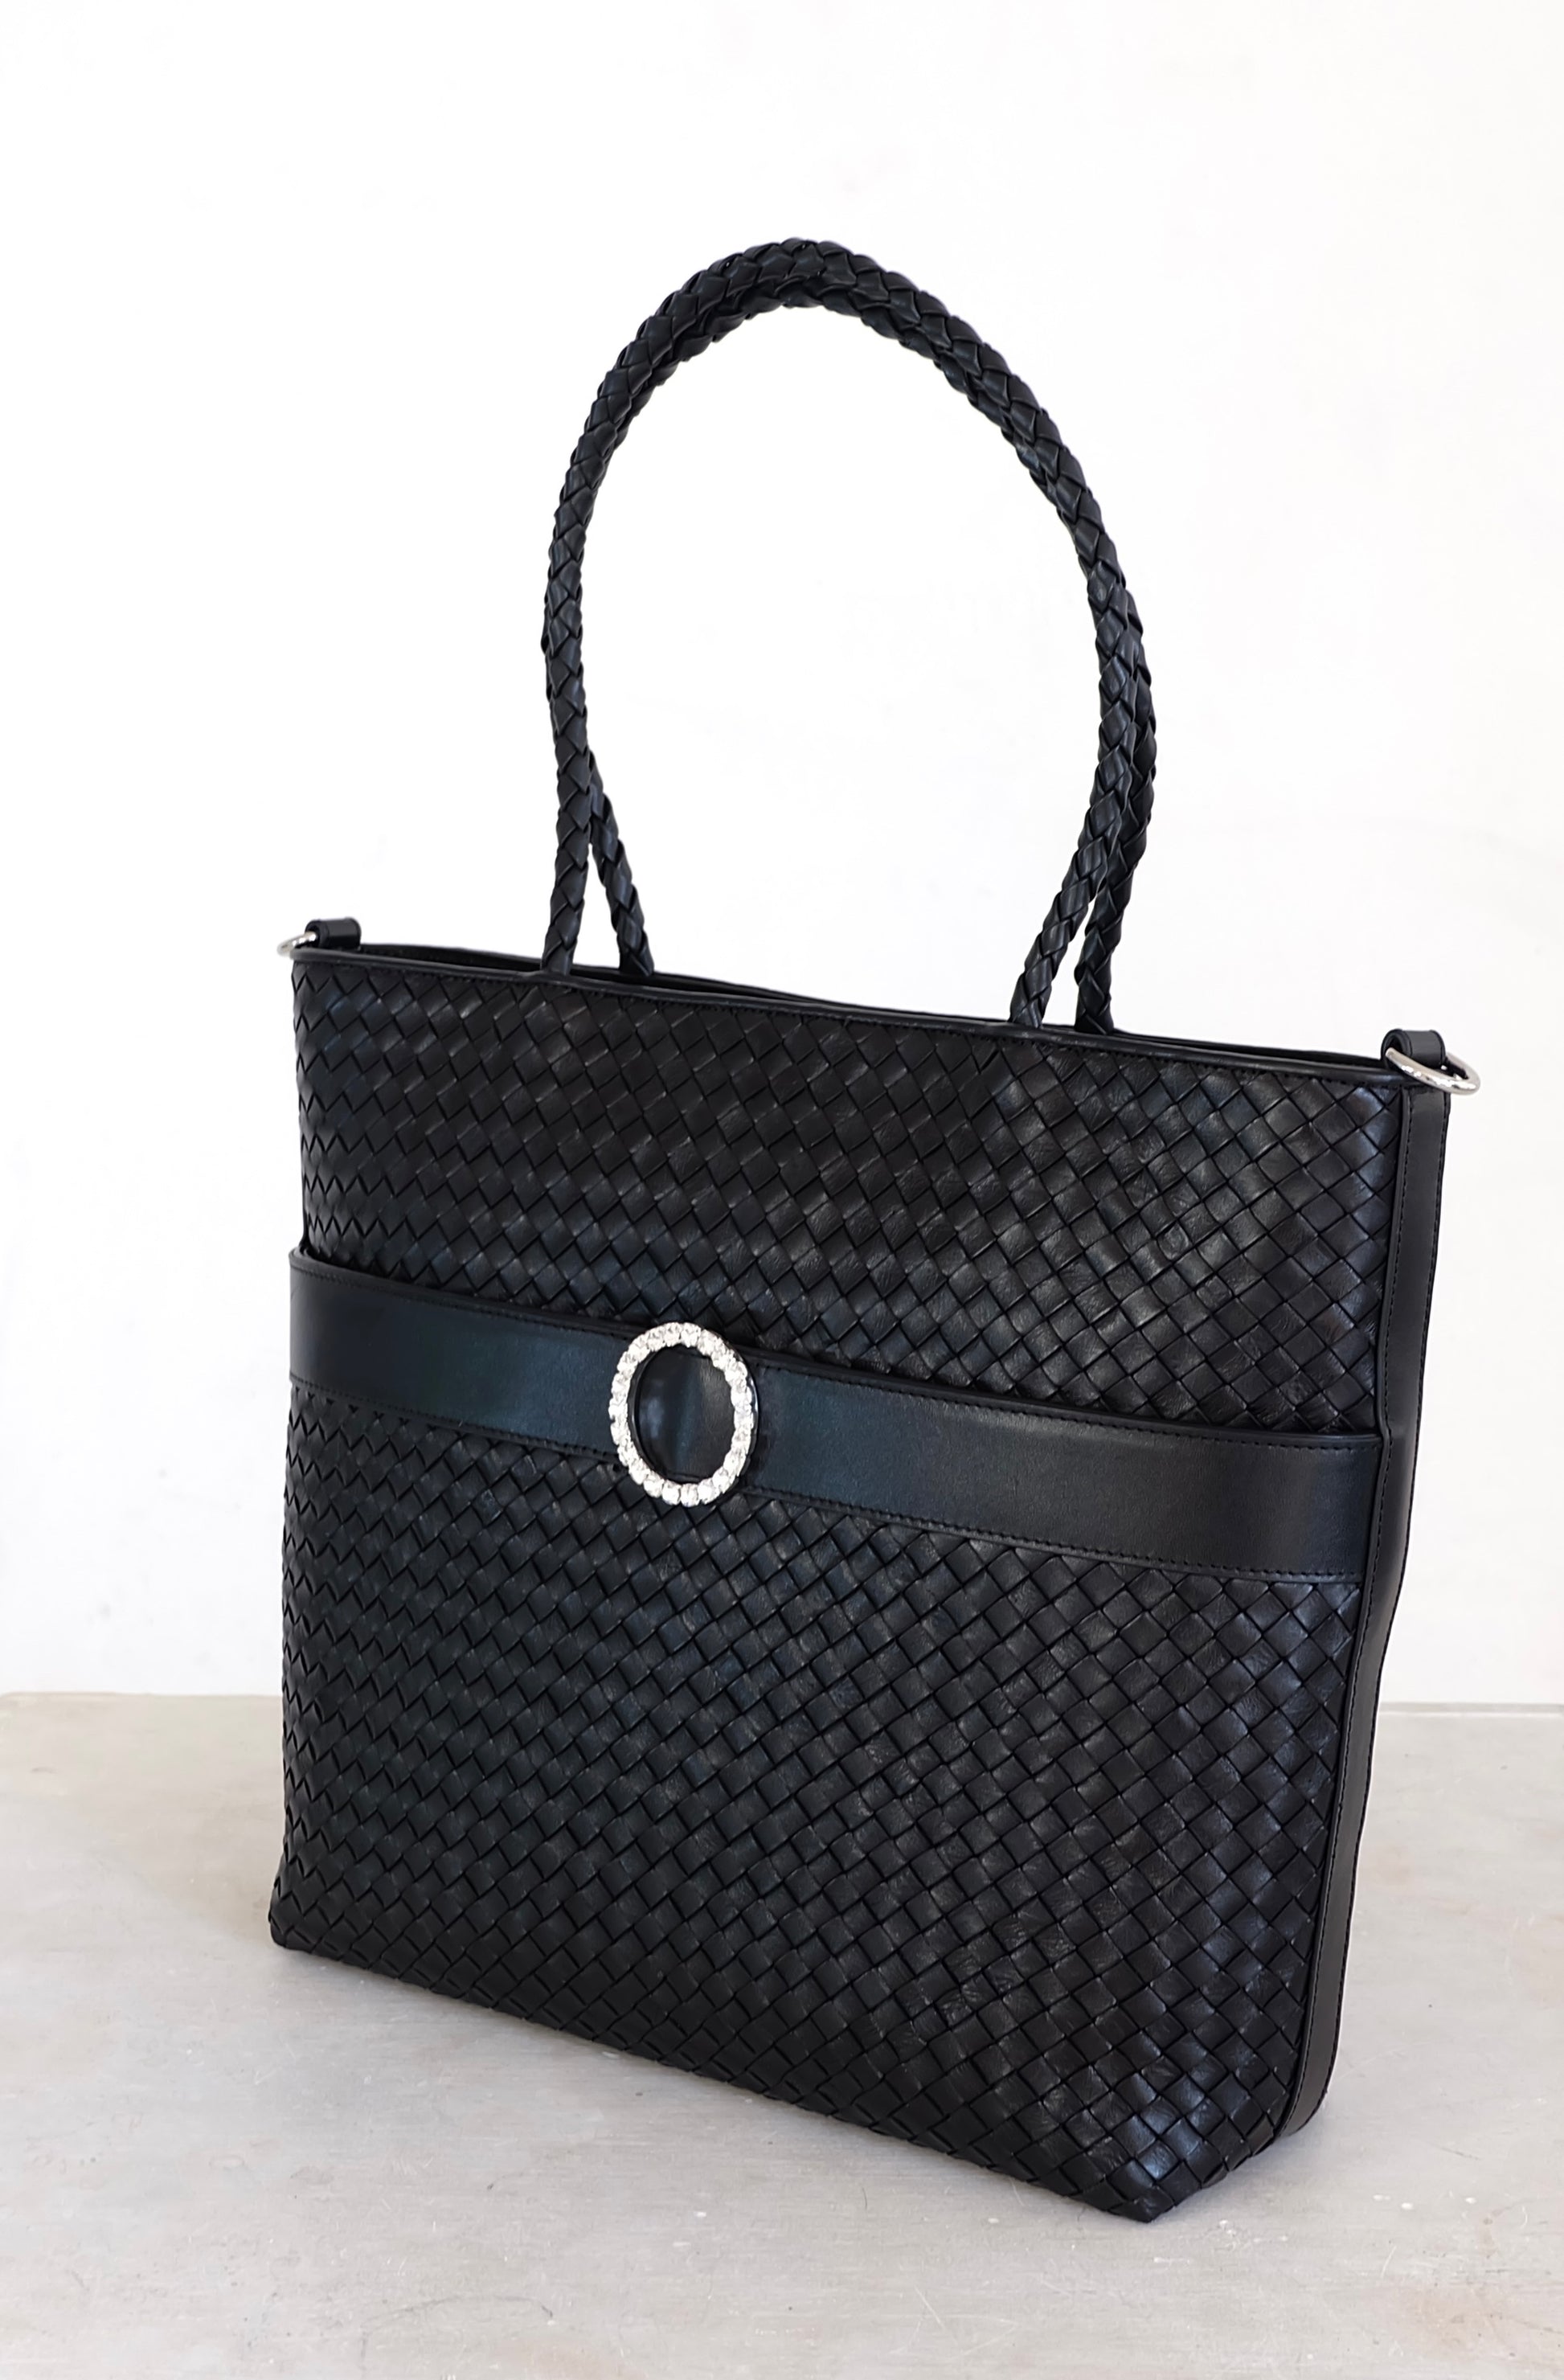  Sustainable Italian leather designer handbag, medium tote and crossbody in charcoal-black. Handbag with accent buckle that is a functional work of art.